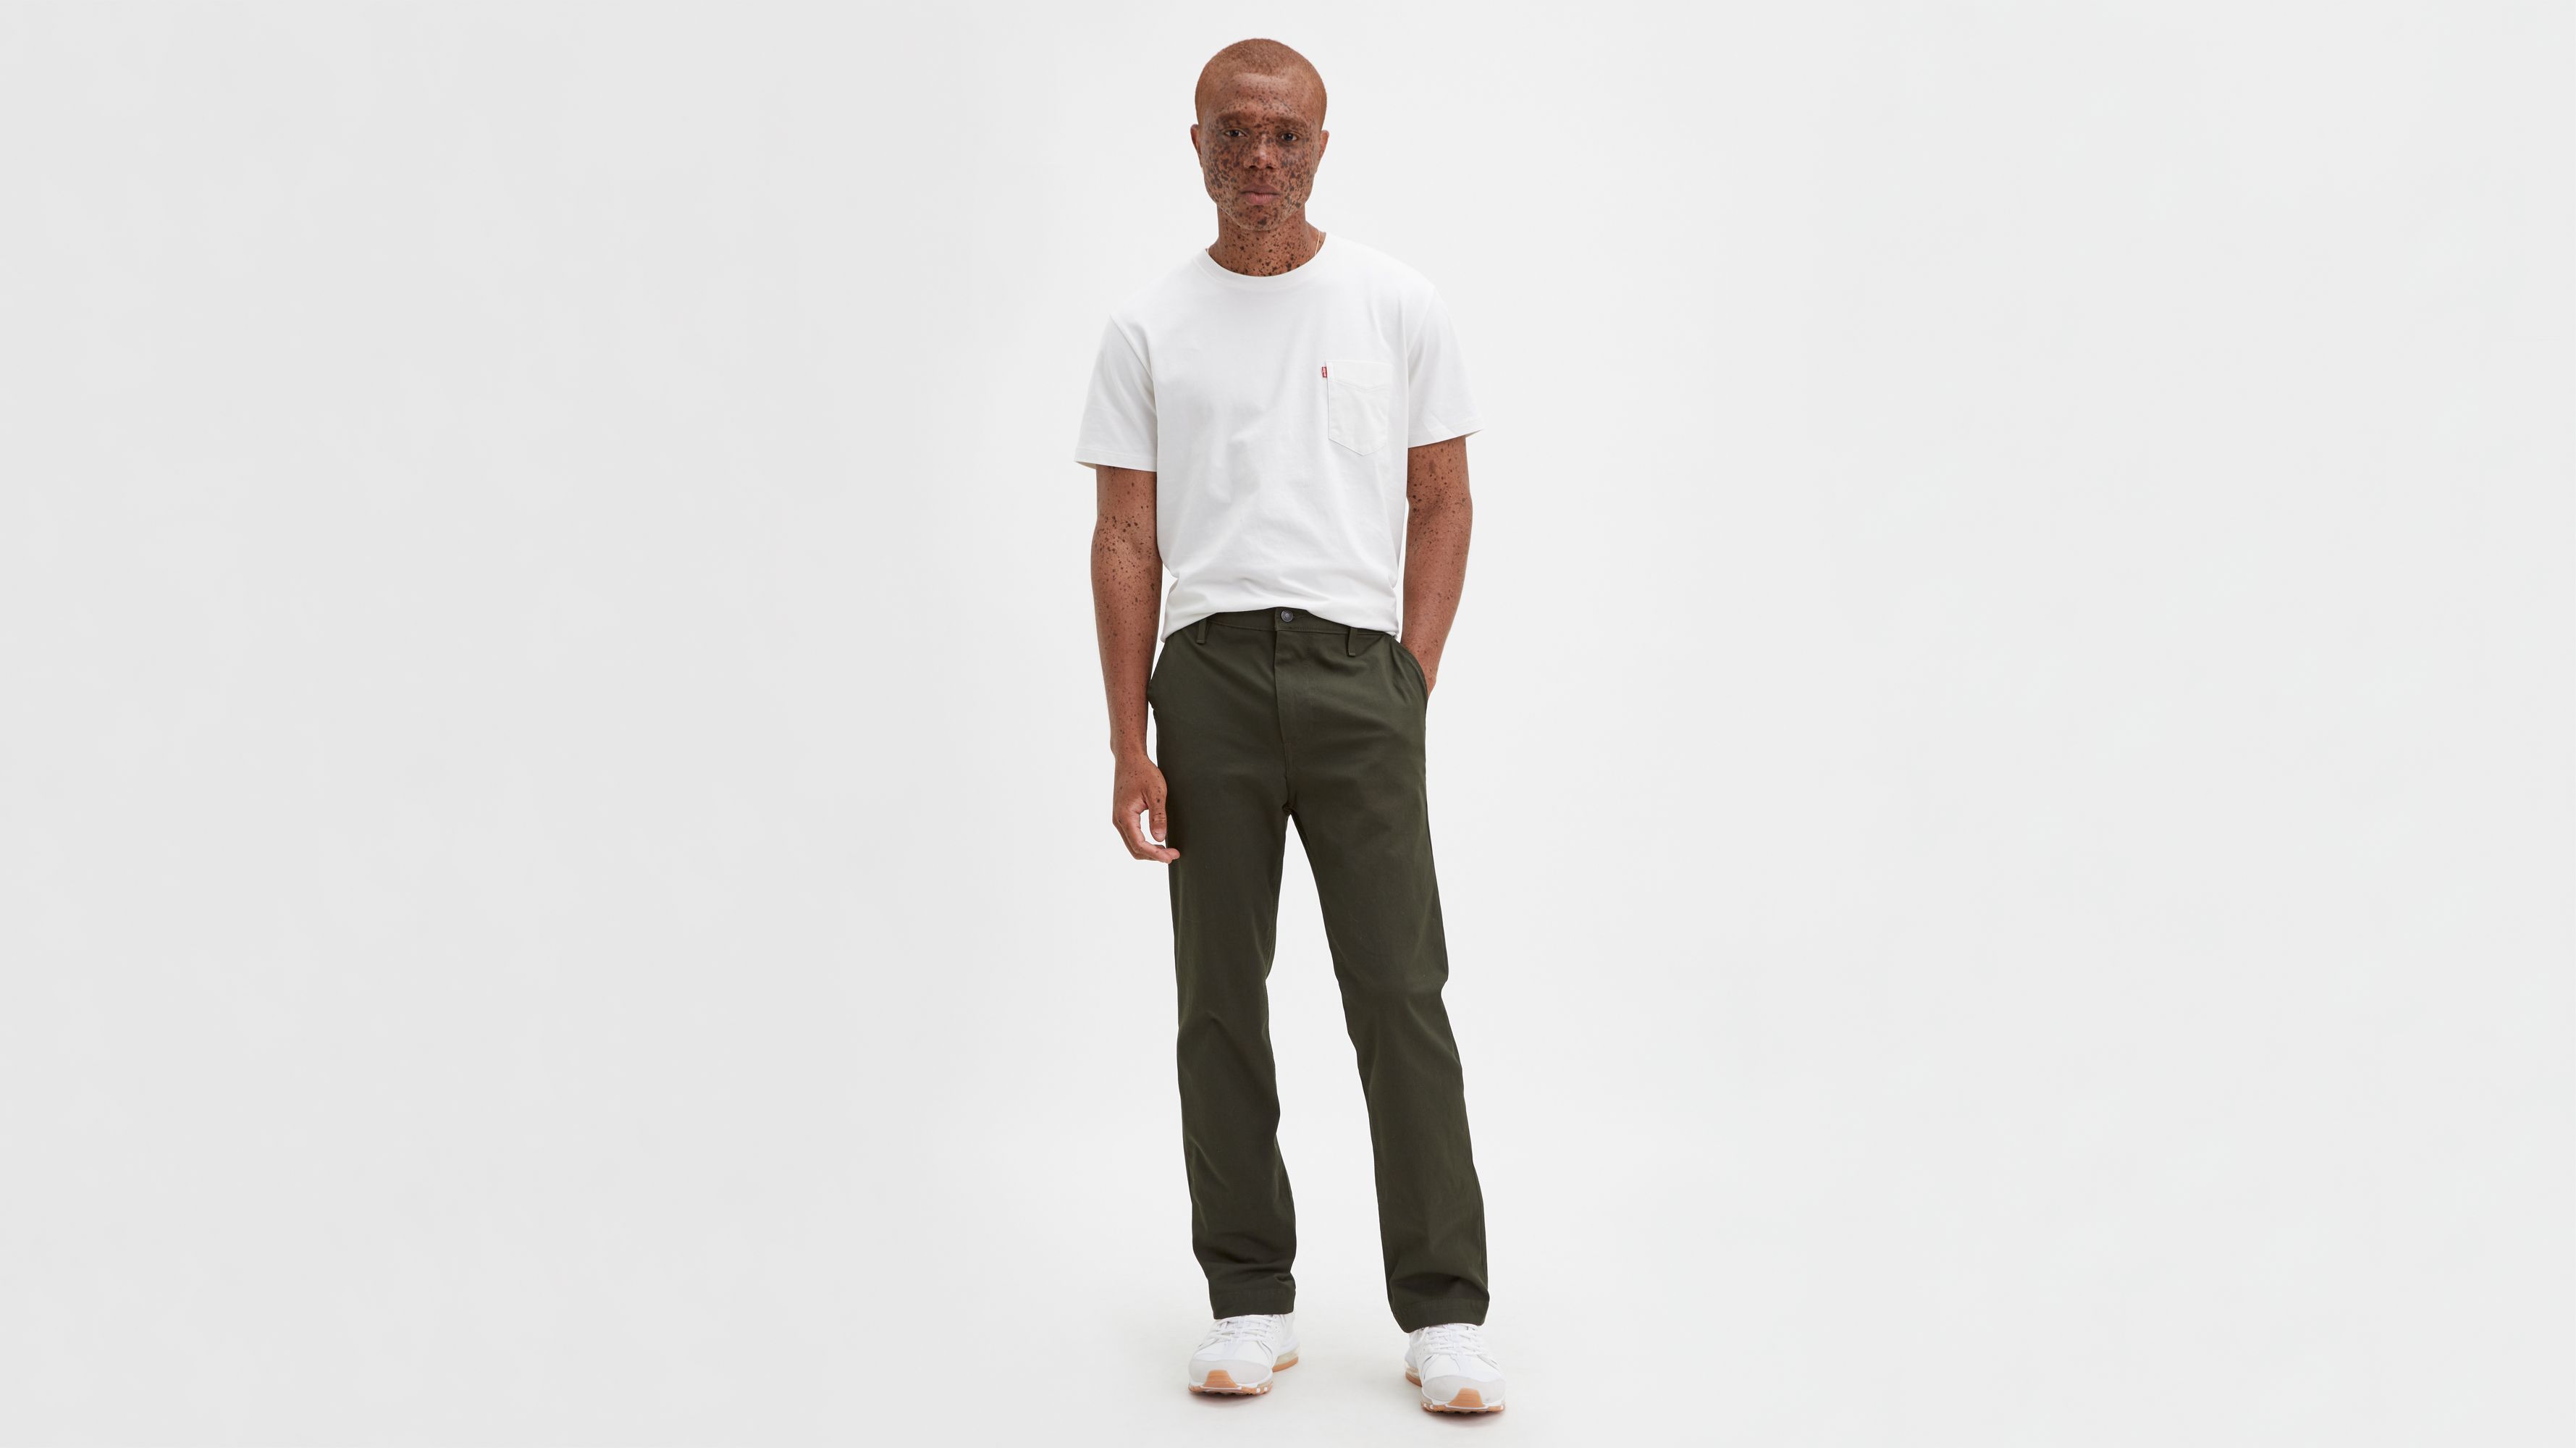 performance 511 trouser jeans